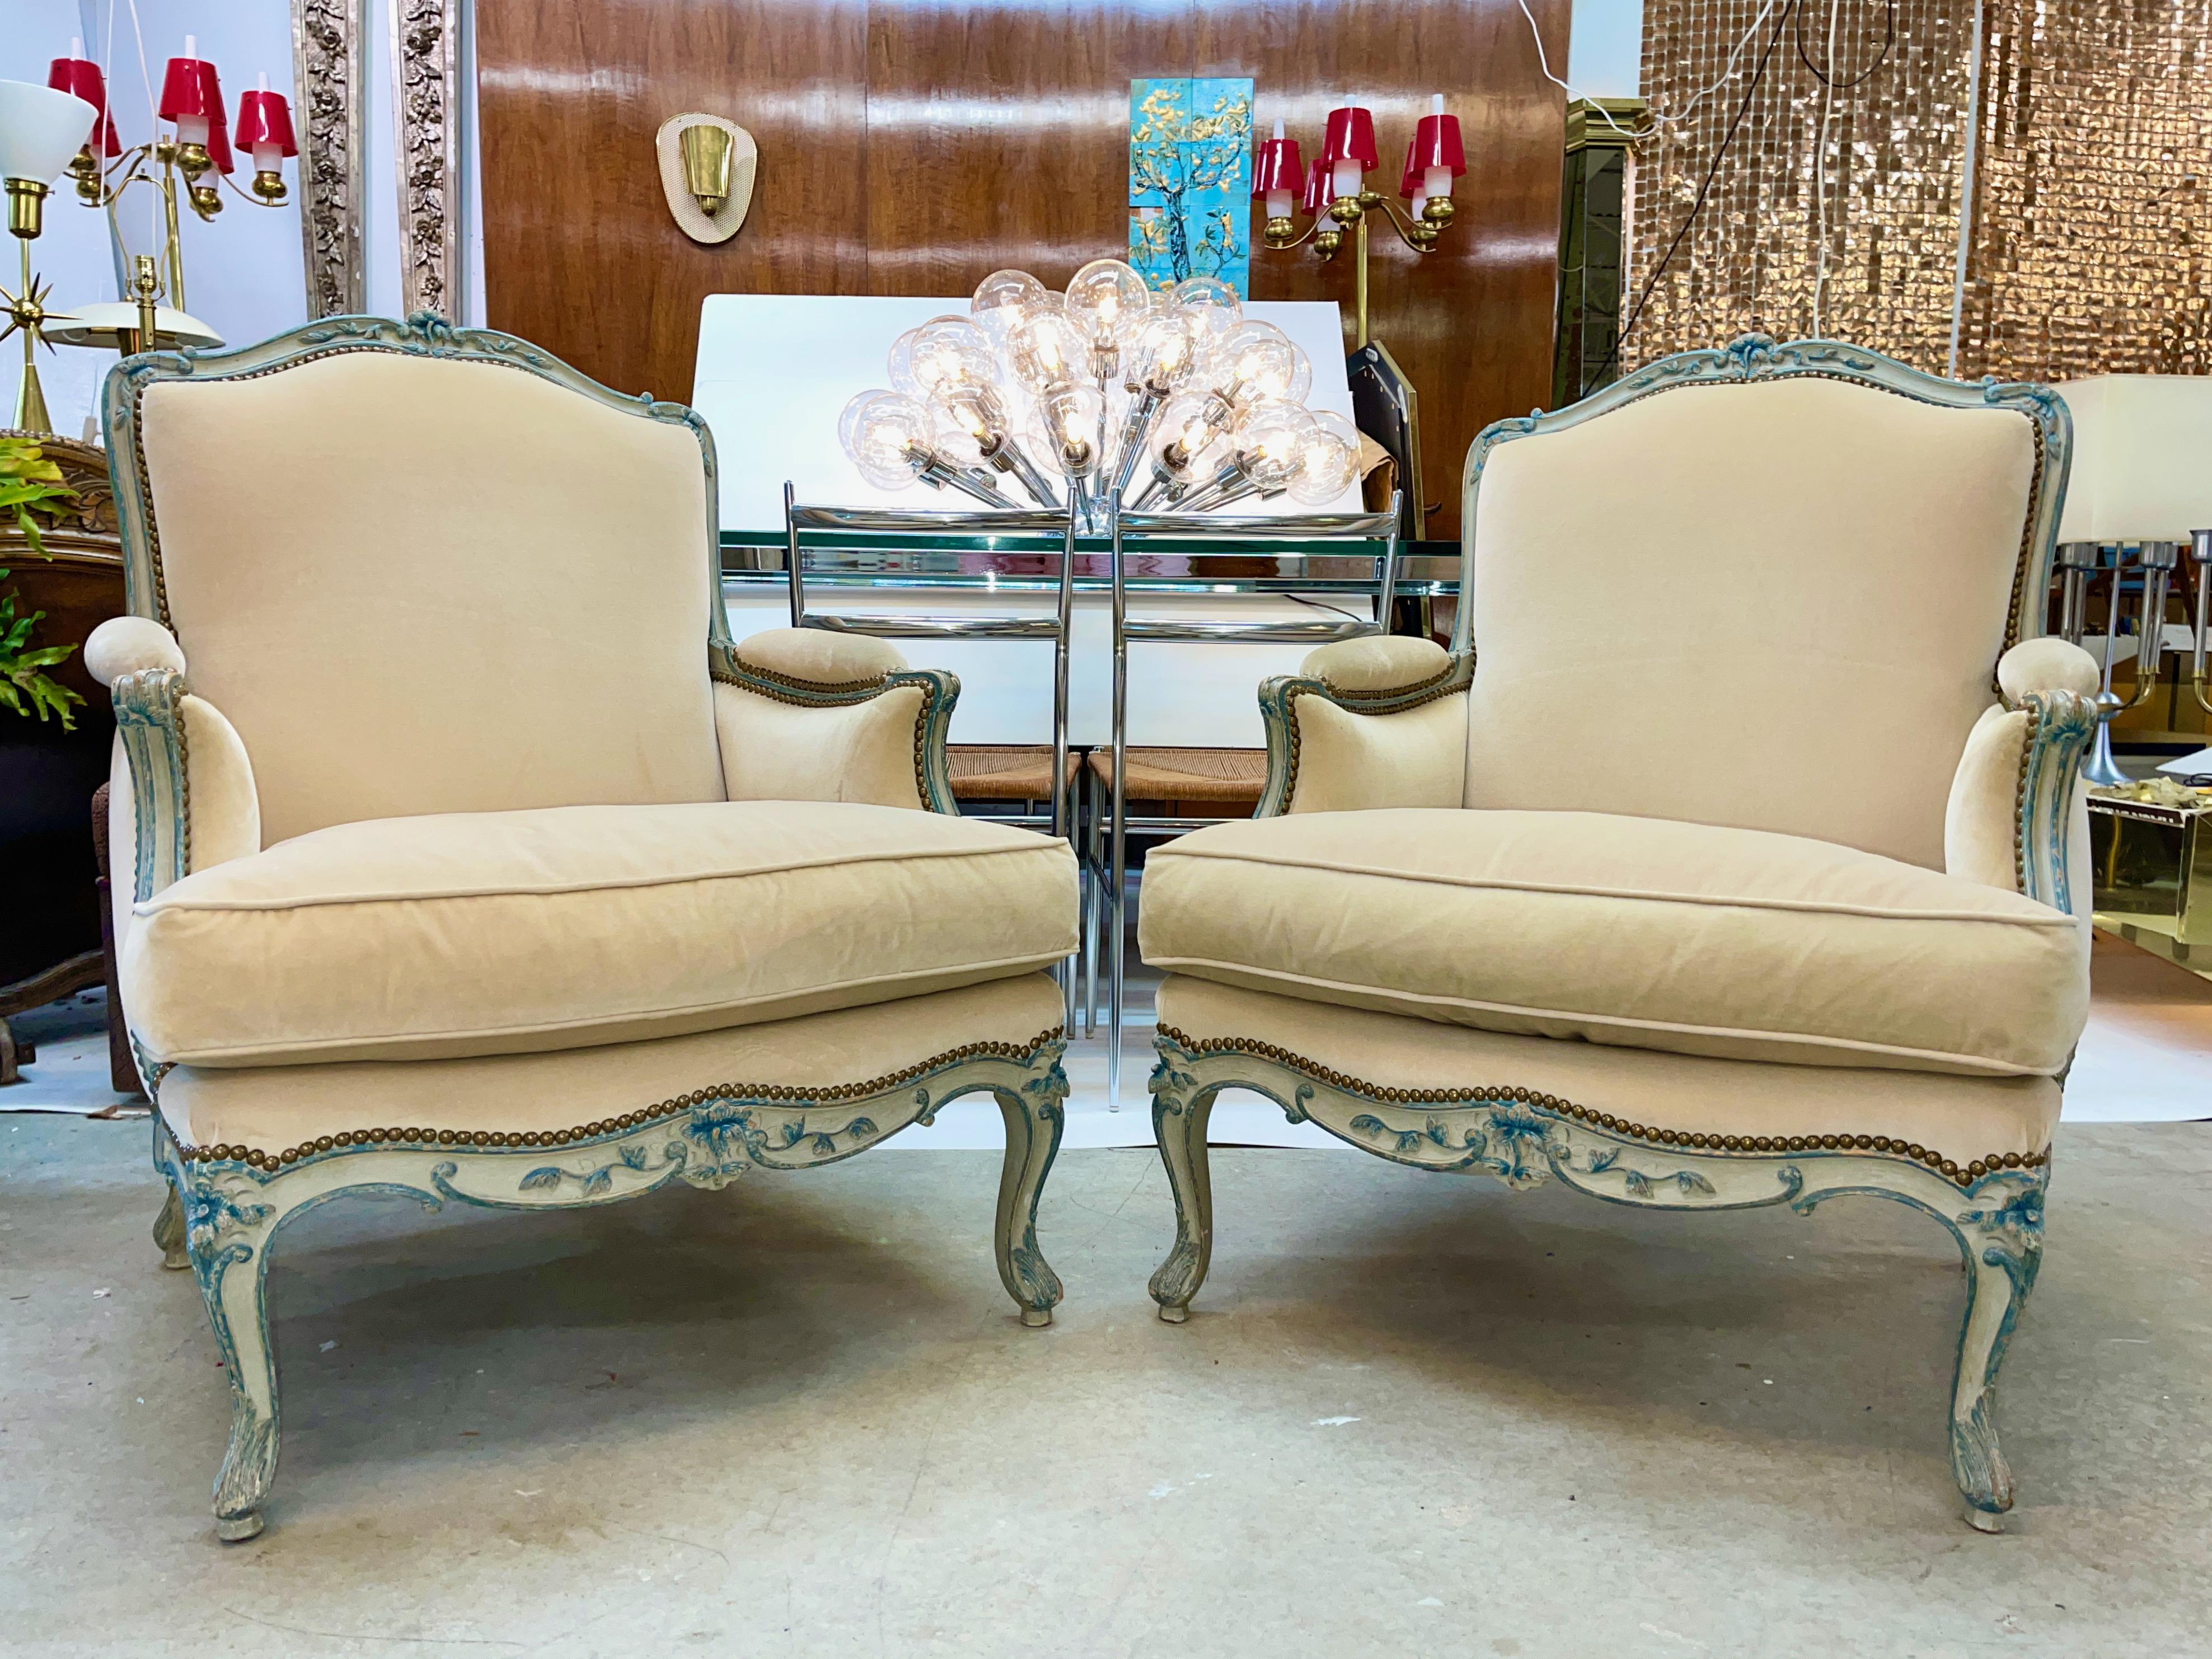 A pair of Louis XV provincial style blue/gray painted bergeres upholstered in cream colored mohair with brass nailhead trim.
Price shown is per pair.
We believe these came from Trouvailles, Boston and are the Ernie chair by Meyer Gunther